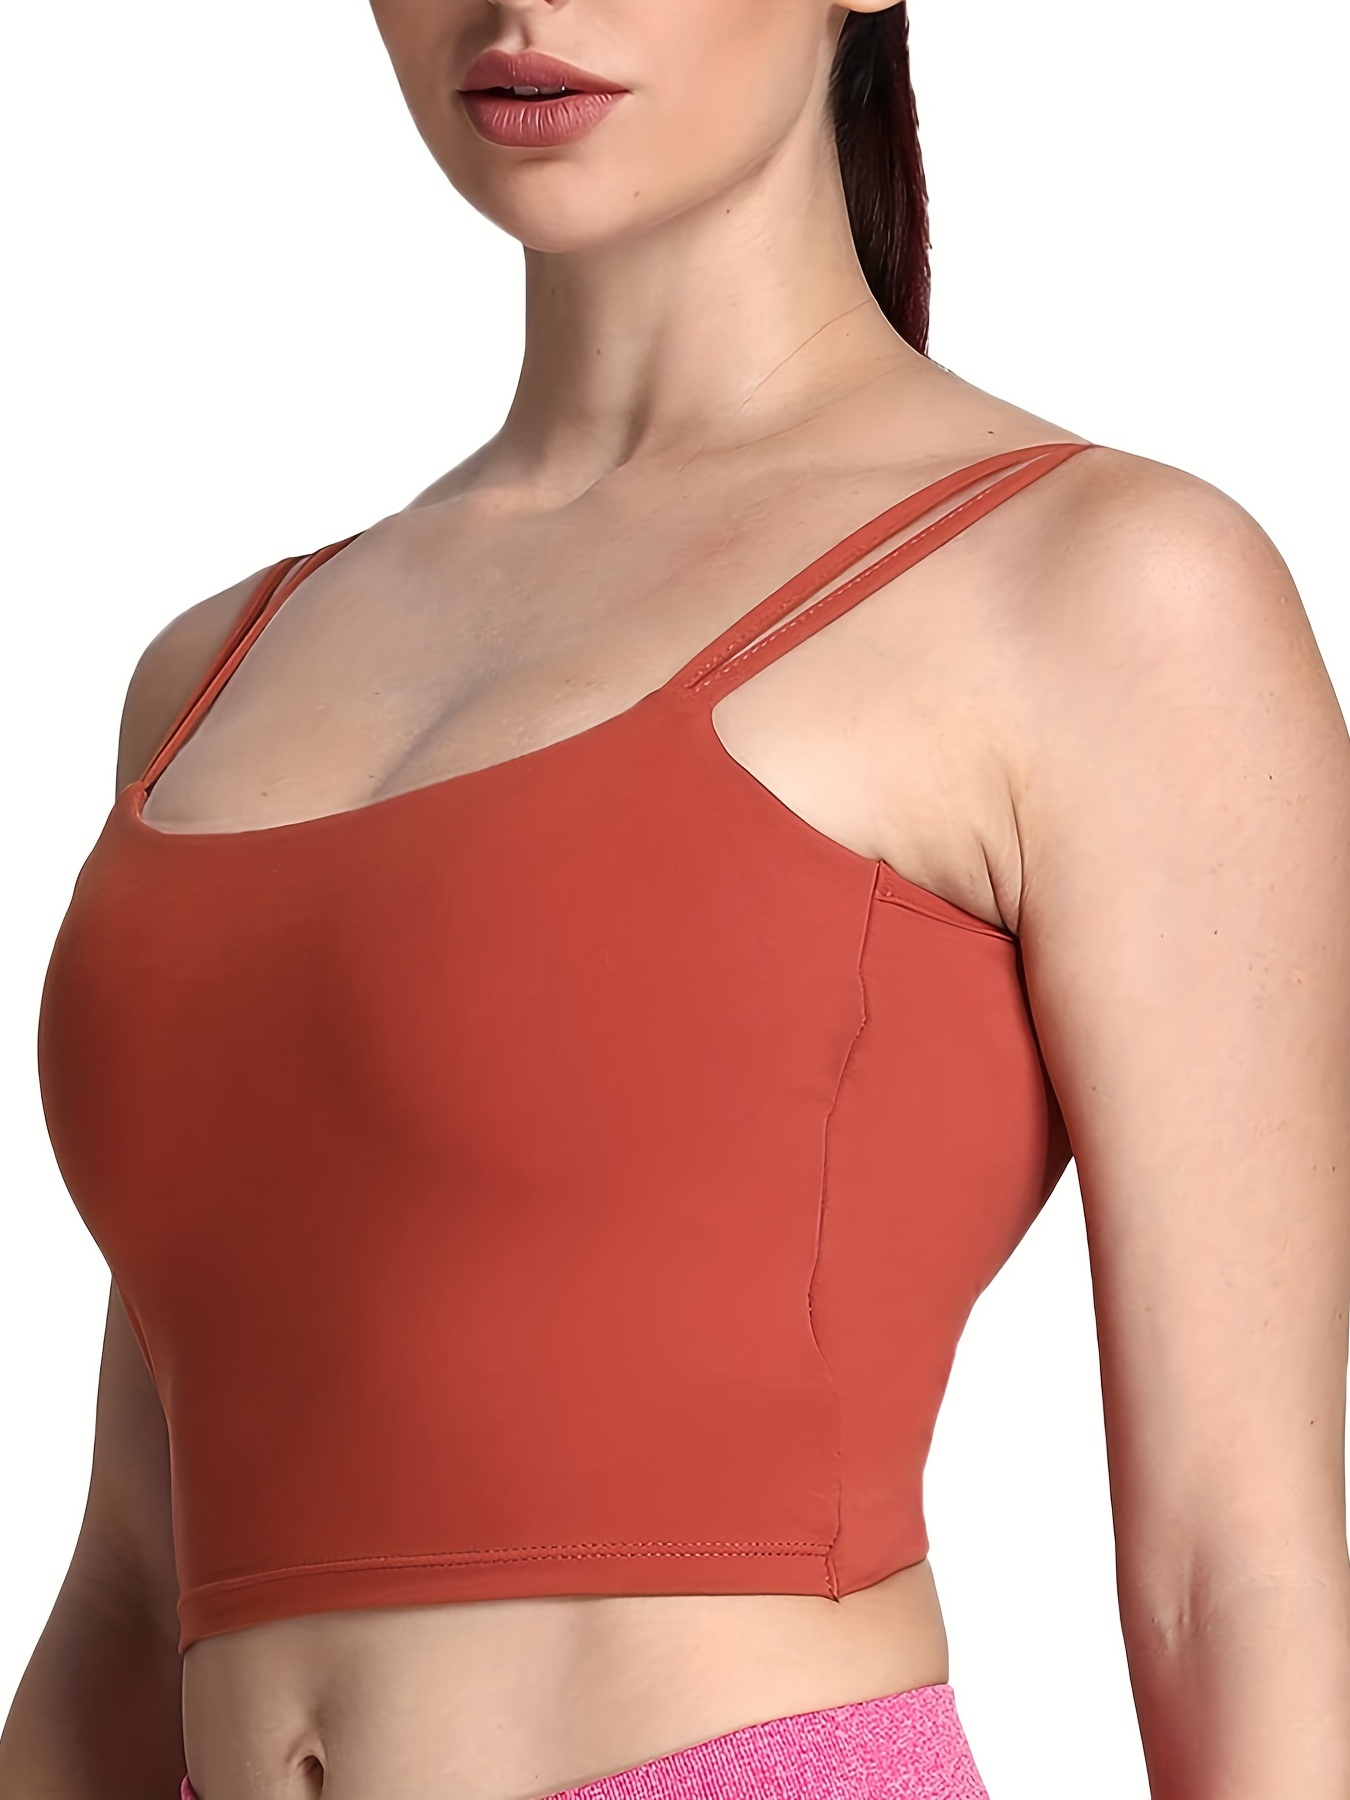  Backless Workout Tops For Women Twist Back Sports Bras  Padded Strappy Yoga Clothes Built In Bra Red S